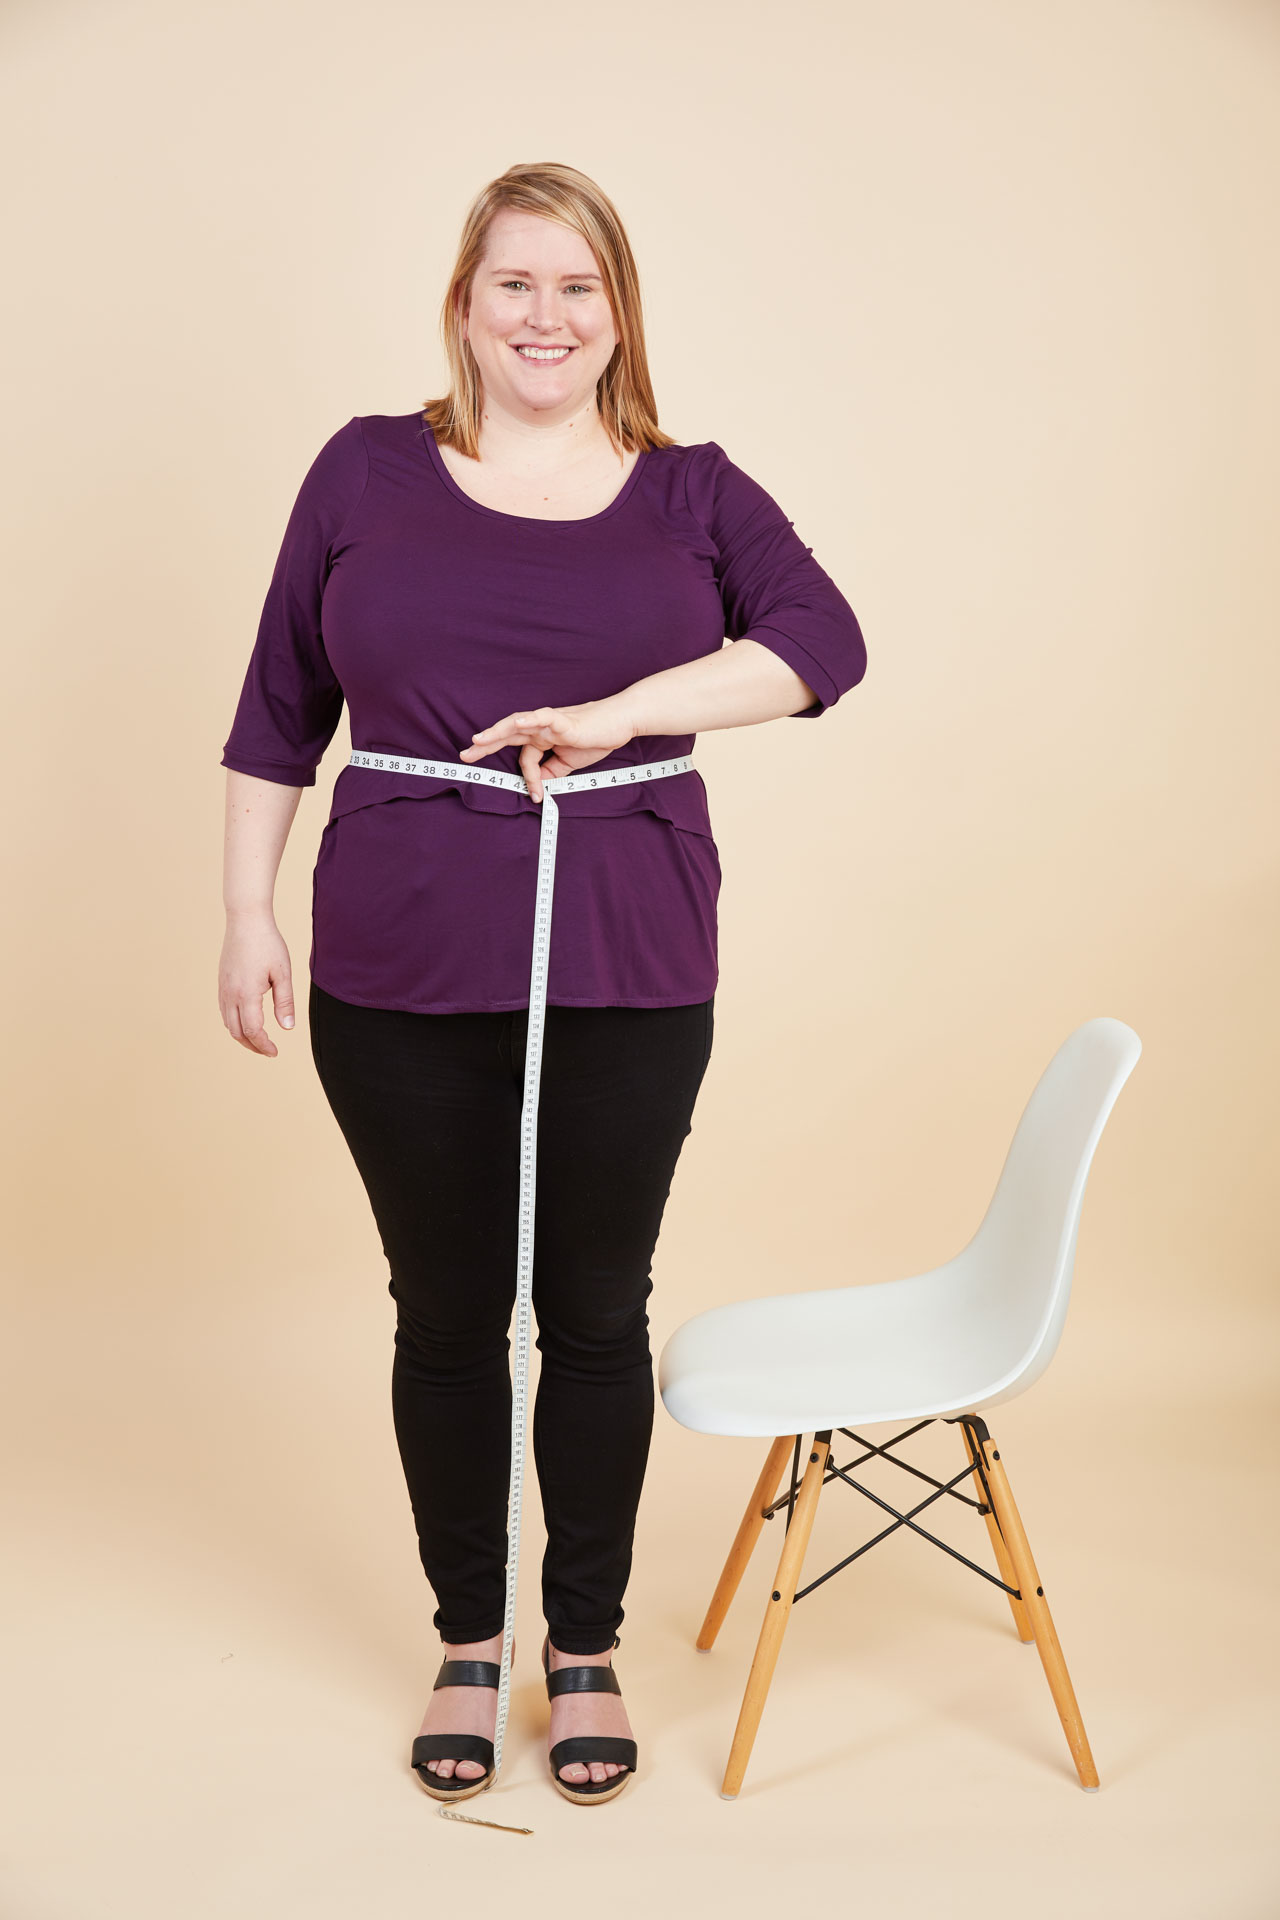 Why you should sit down to take your measurements